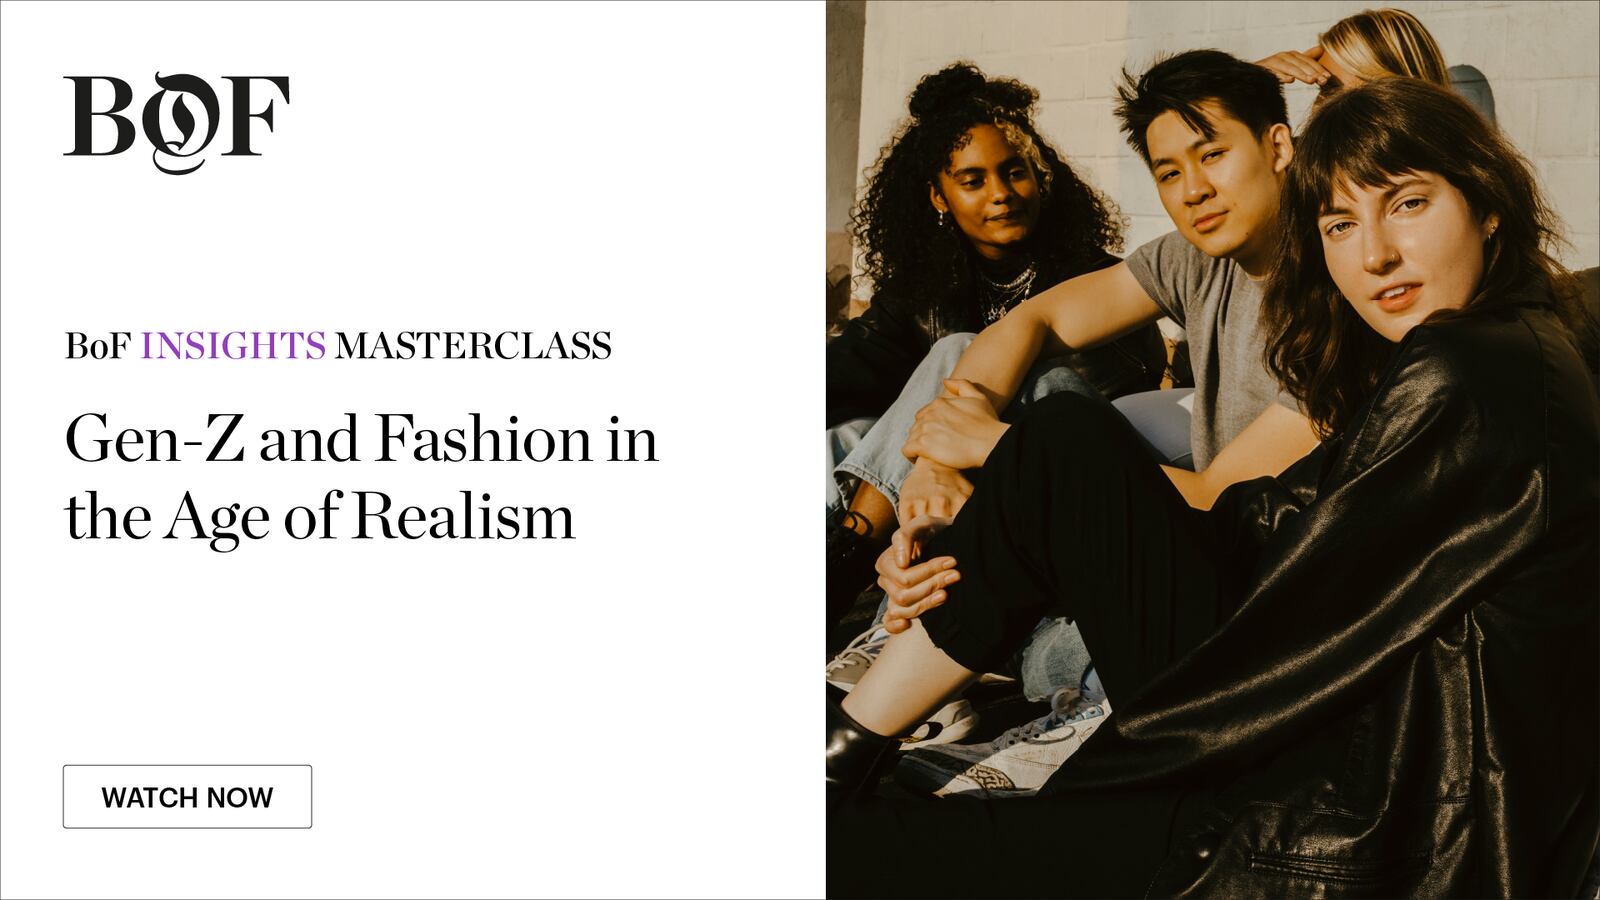 BoF Insights Masterclass: Gen-Z and Fashion in the Age of Realism